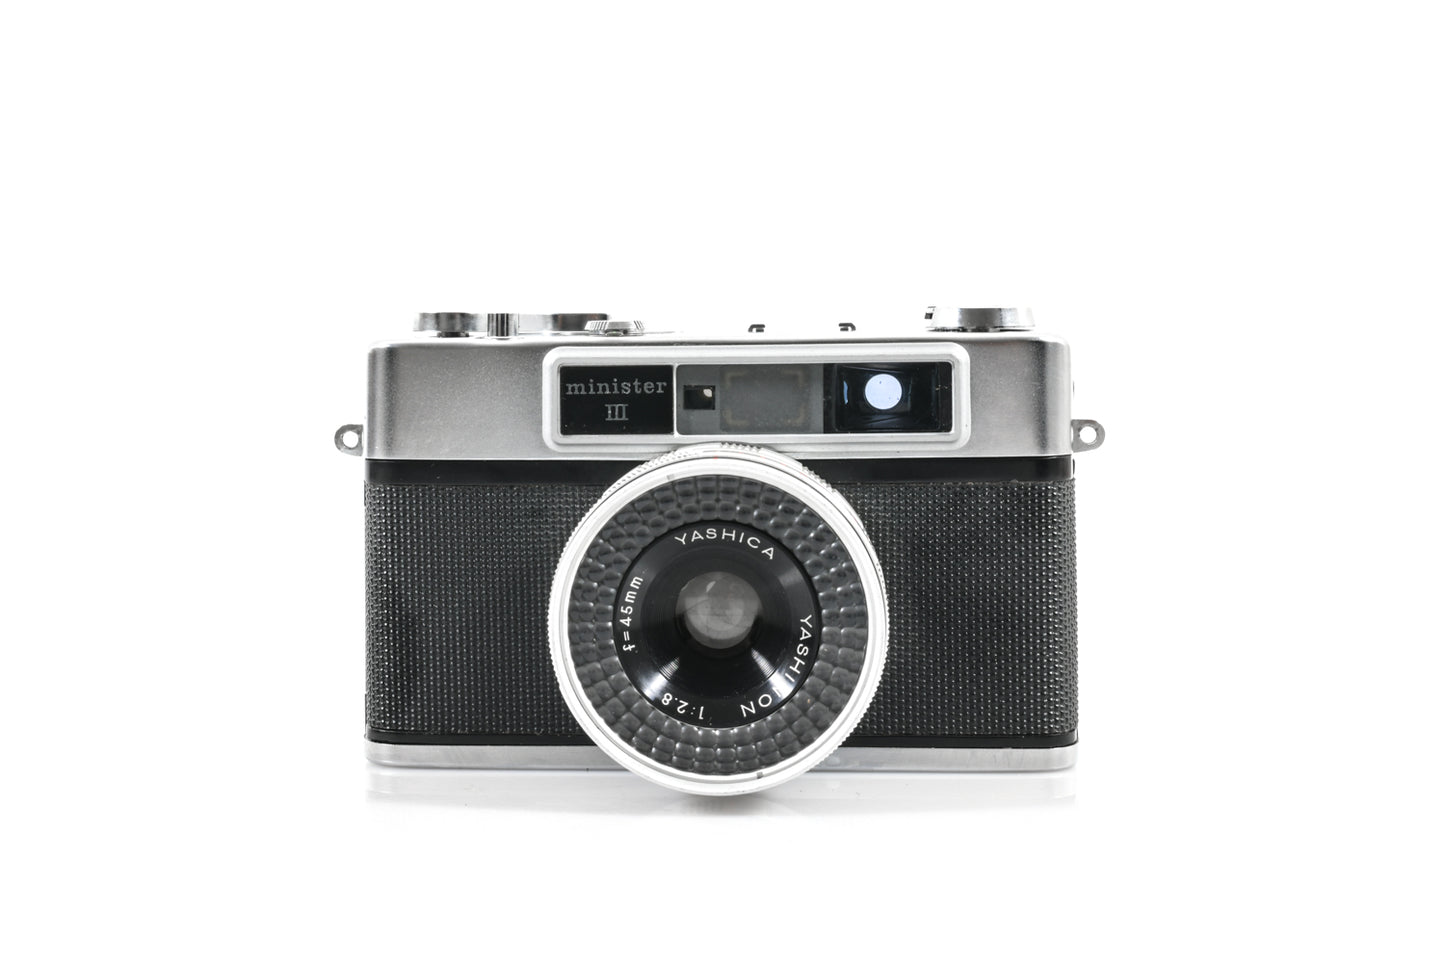 RARE 1960s Yashica Minister III 35mm Rangefinder Film Camera with Yashica 45/2.8mm Lens